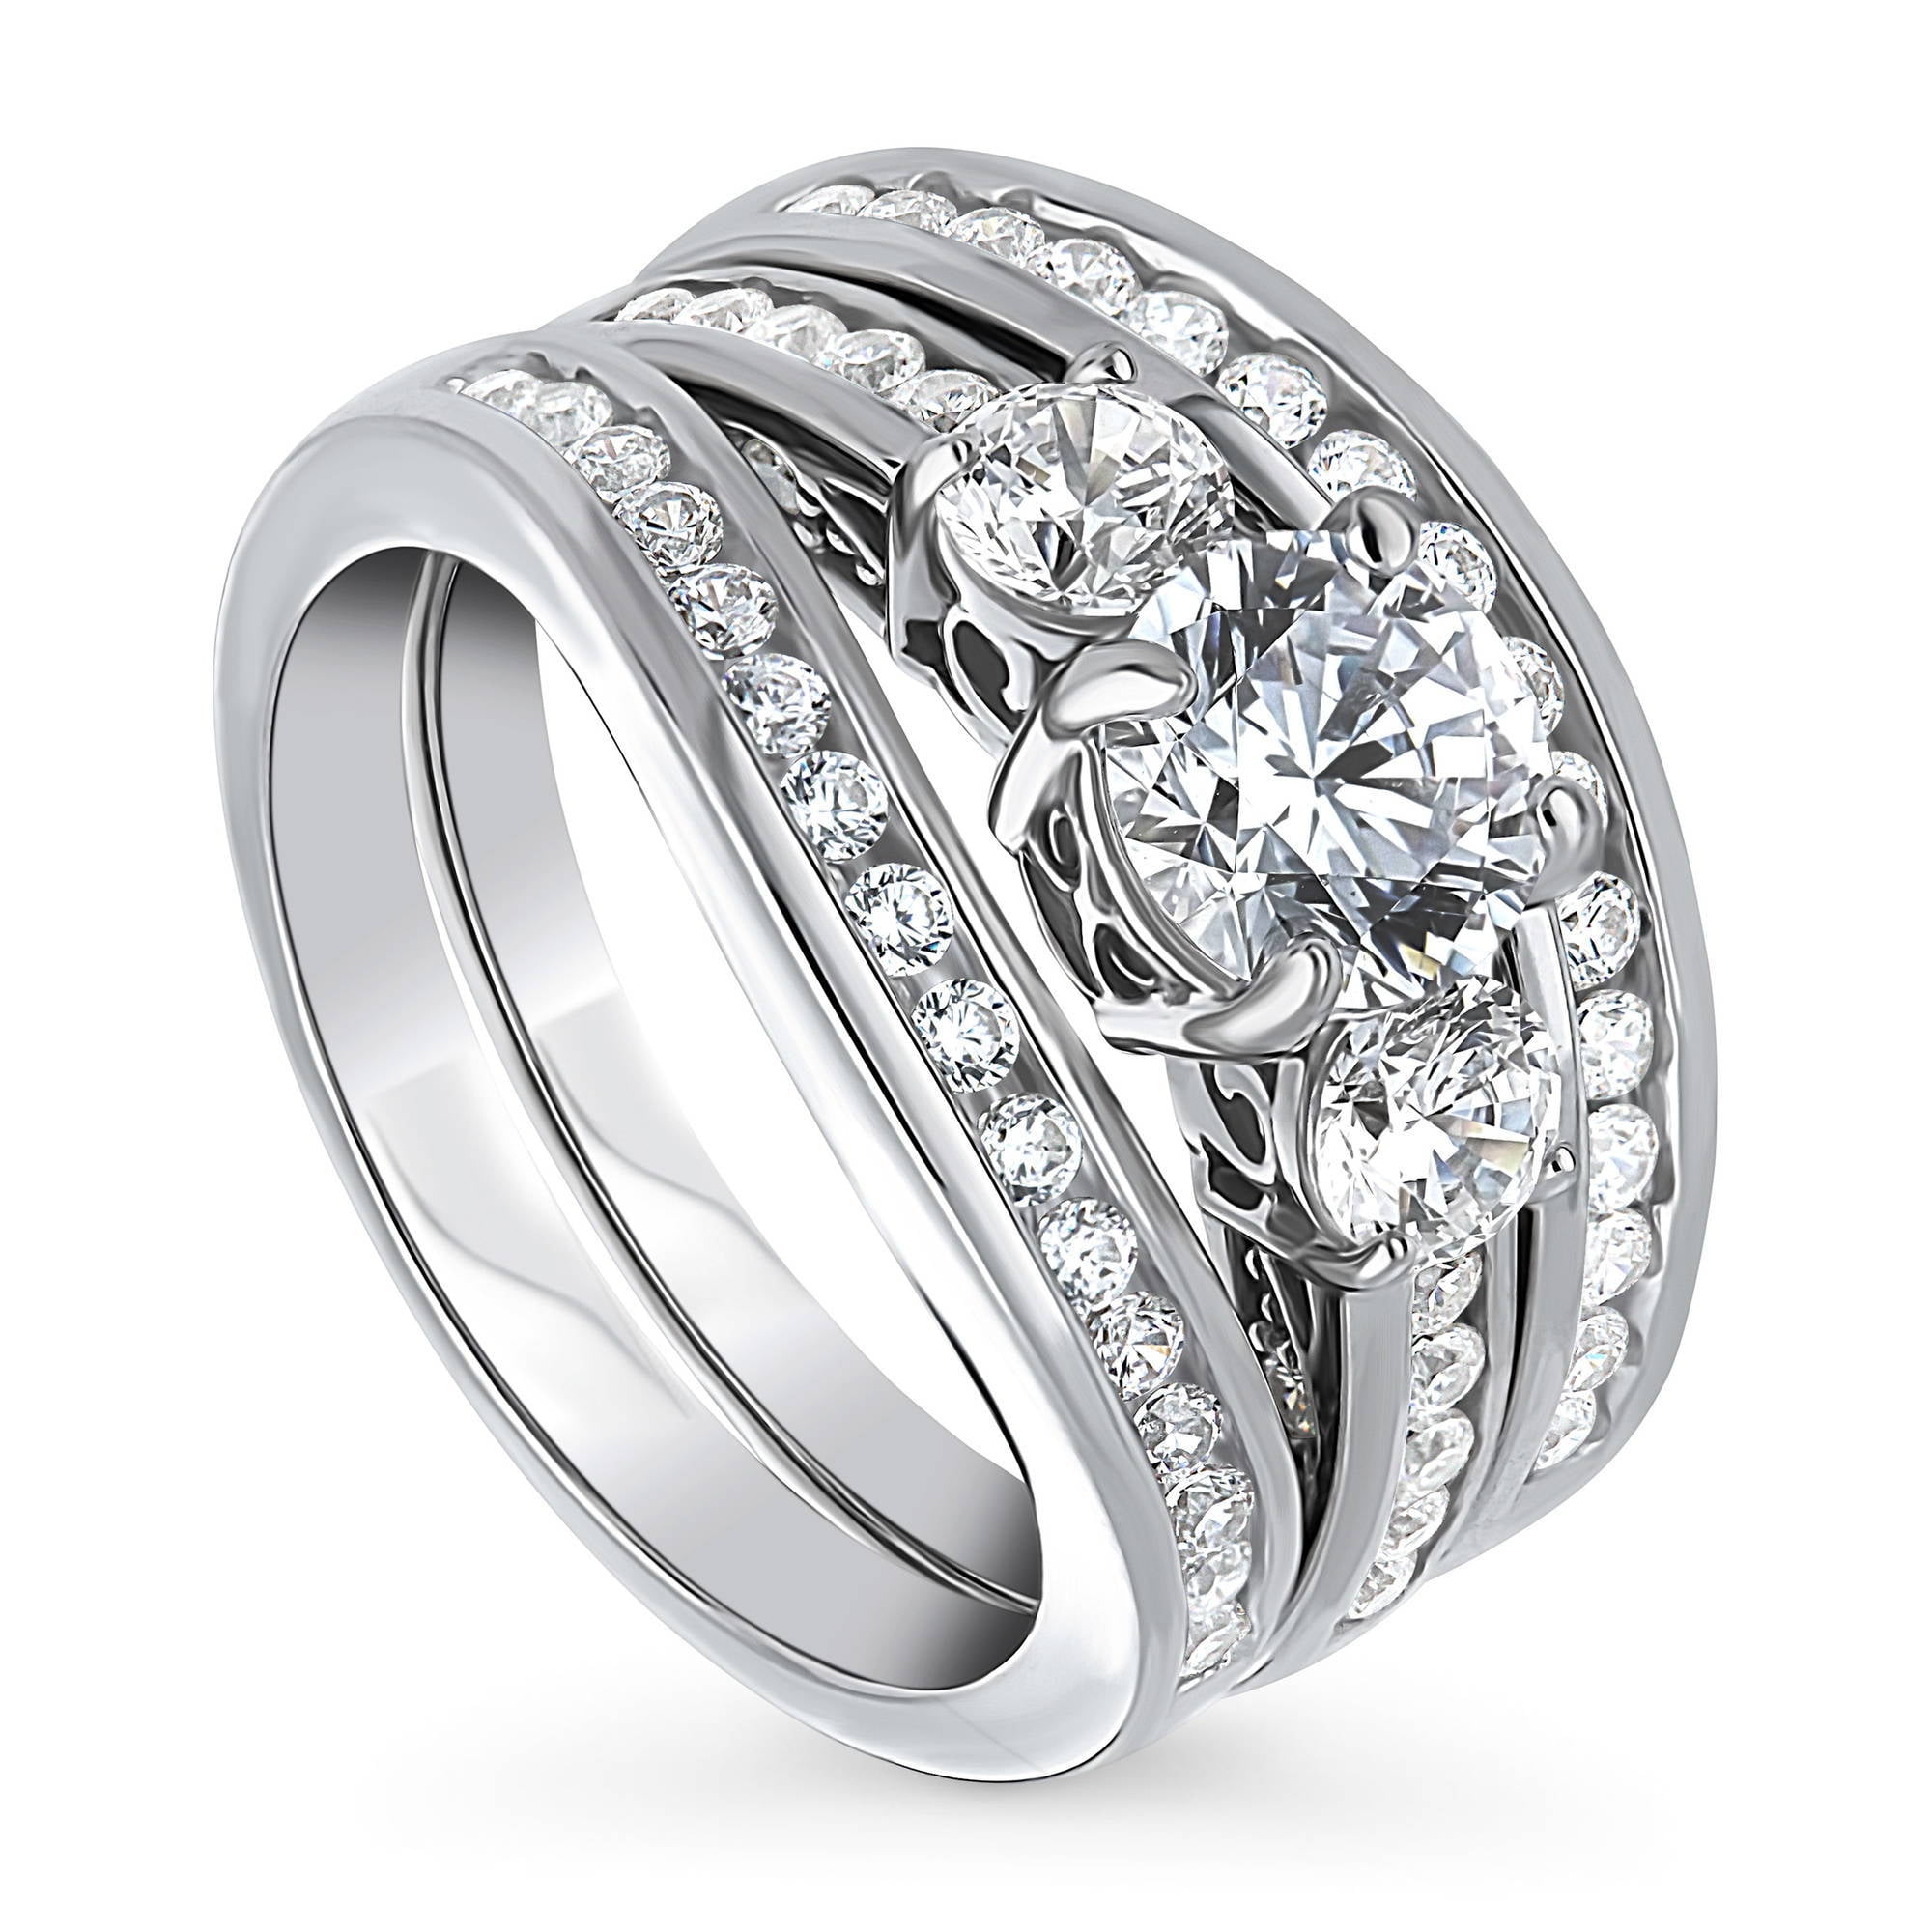 BERRICLE Sterling Silver CZ 3-Stone Anniversary Engagement Wedding Ring Set